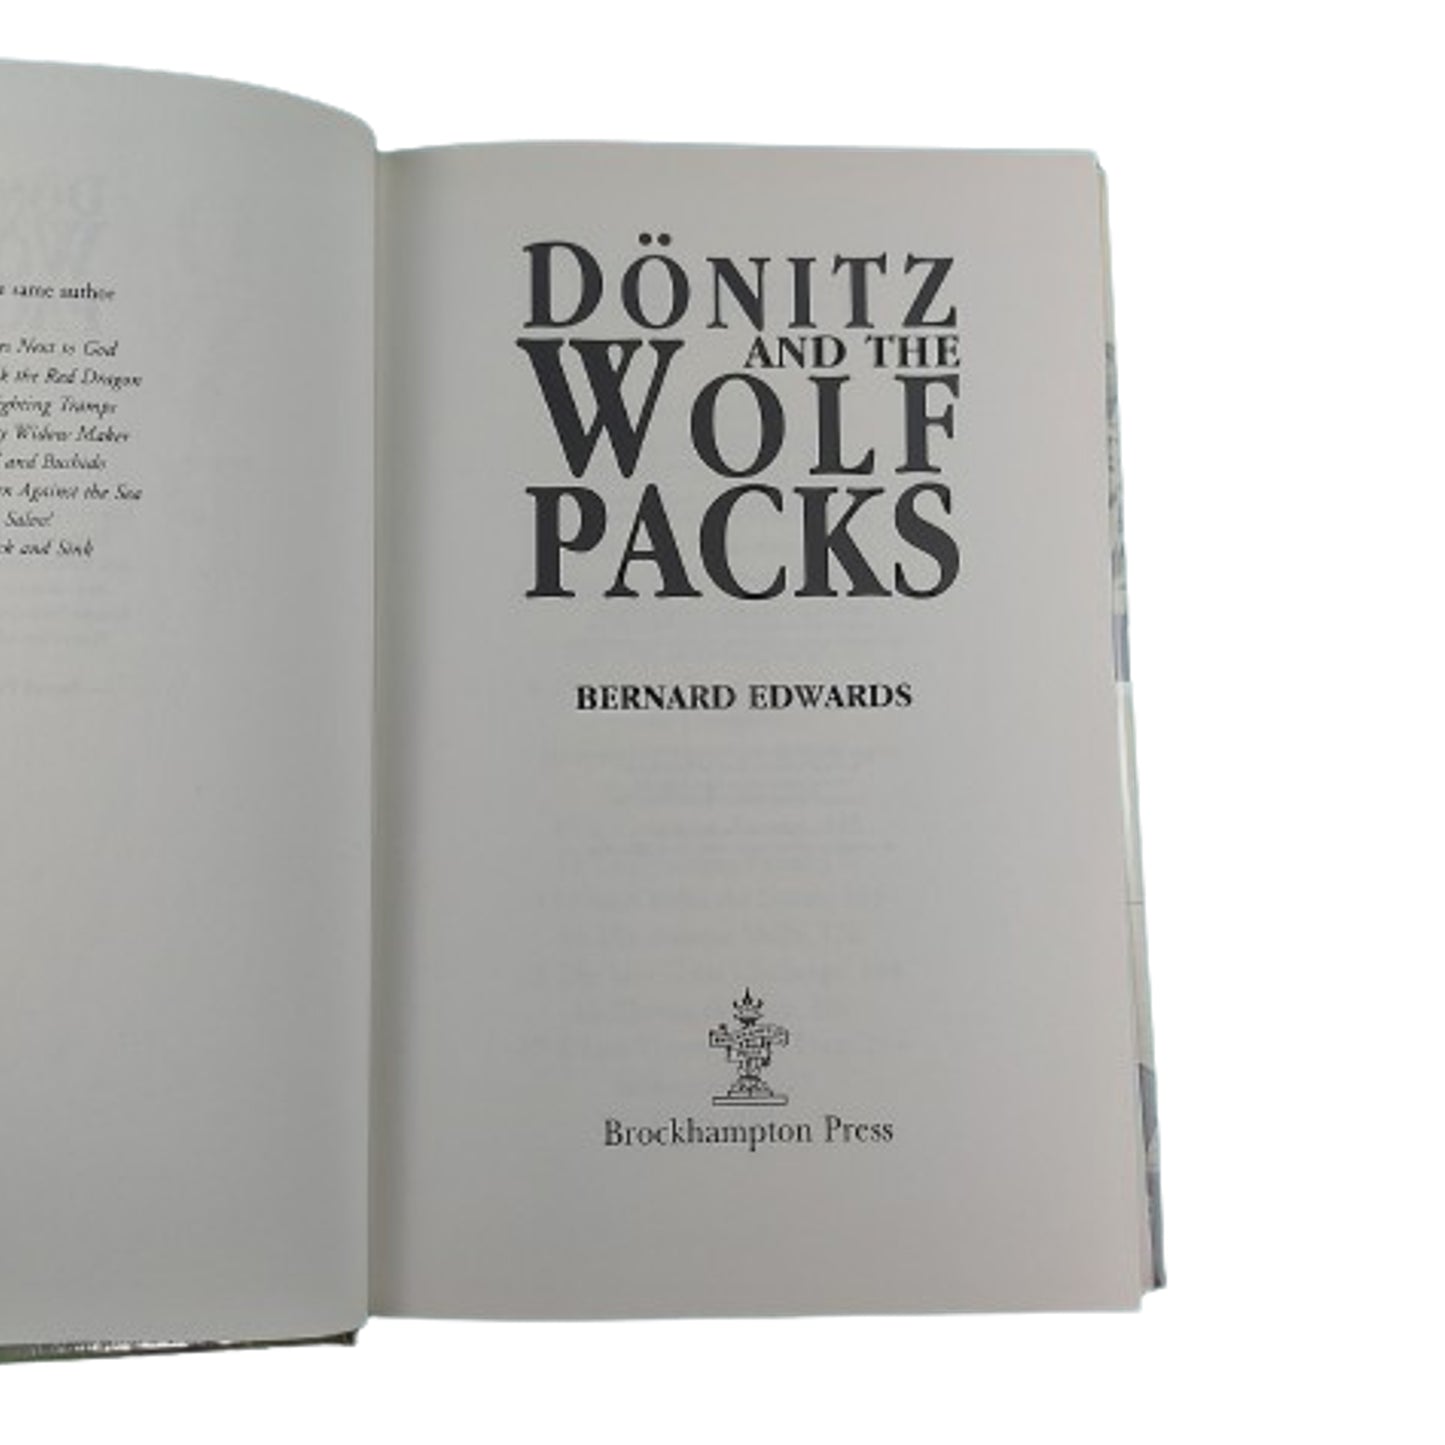 Donitz And The Wolfe Packs